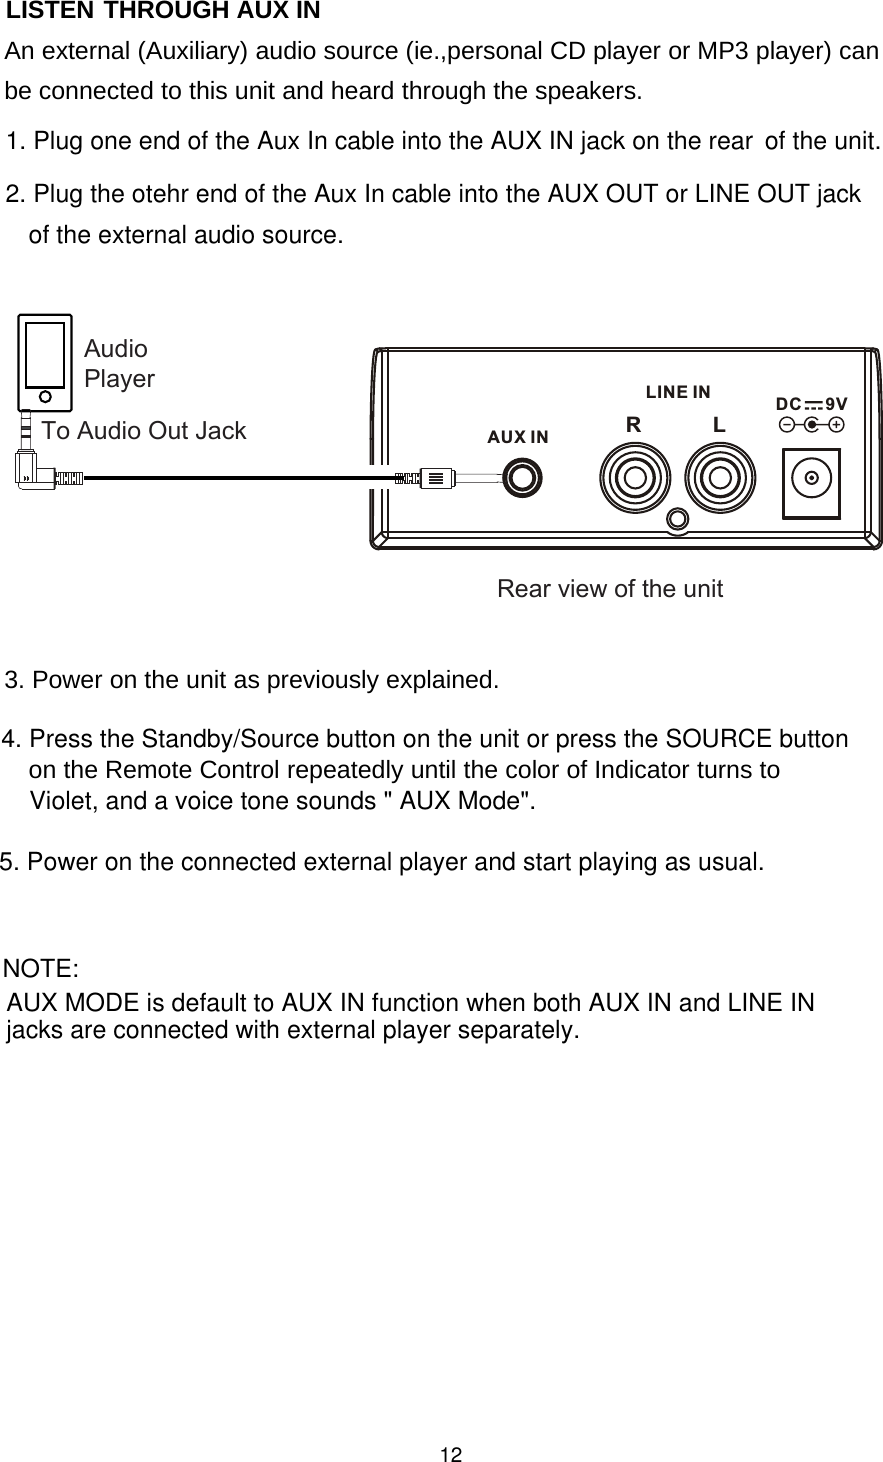 An external (Auxiliary) audio source (ie.,personal CD player or MP3 player) canbe connected to this unit and heard through the speakers.3. Power on the unit as previously explained.Audio PlayerTo Audio Out JackRear view of the unit121. Plug one end of the Aux In cable into the AUX IN jack on the rear  of the unit.on the Remote Control repeatedly until the color of Indicator turns to4. Press the Standby/Source button on the unit or press the SOURCE buttonViolet, and a voice tone sounds &quot; AUX Mode&quot;. LISTEN  THROUGH  AUX  IN2. Plug the otehr end of the Aux In cable into the AUX OUT or LINE OUT jackof the external audio source.AUX IN LRDC     9VLINE IN5. Power on the connected external player and start playing as usual.jacks are connected with external player separately.NOTE: AUX MODE is default to AUX IN function when both AUX IN and LINE IN 